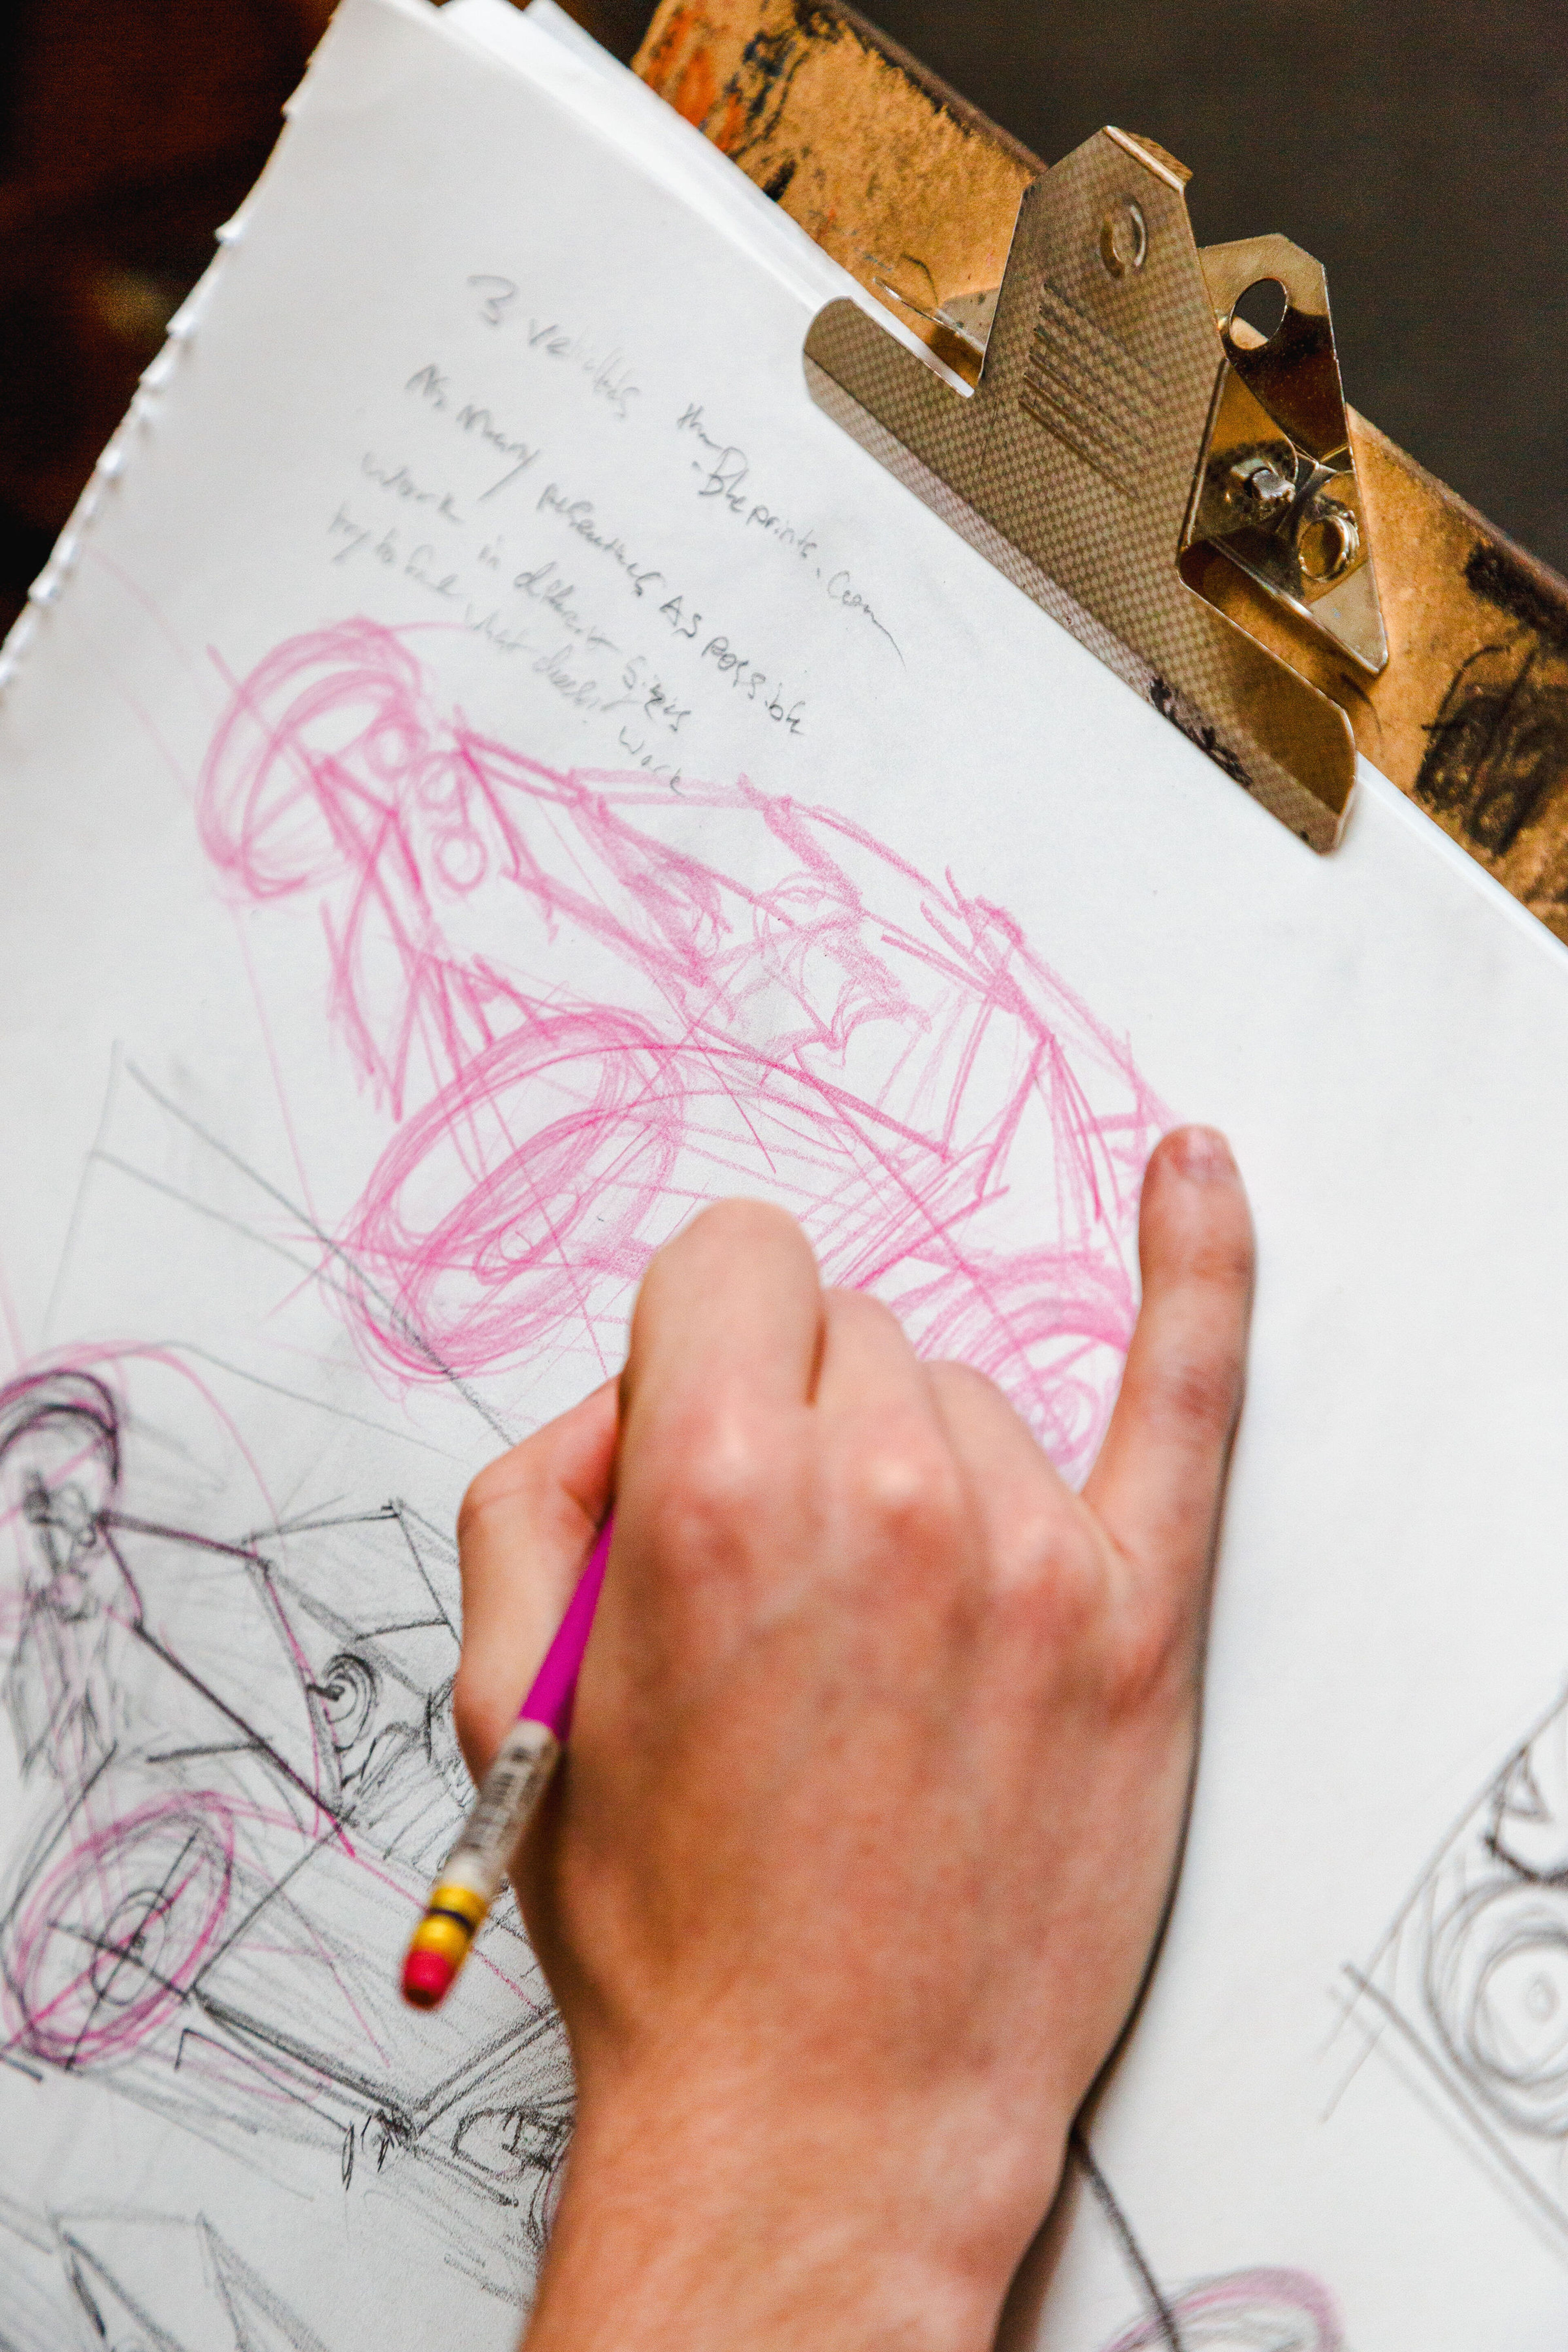 A close-up view of an artist's hand as they draw preliminary sketches with a red pencil on paper, clipped to a wooden clipboard.